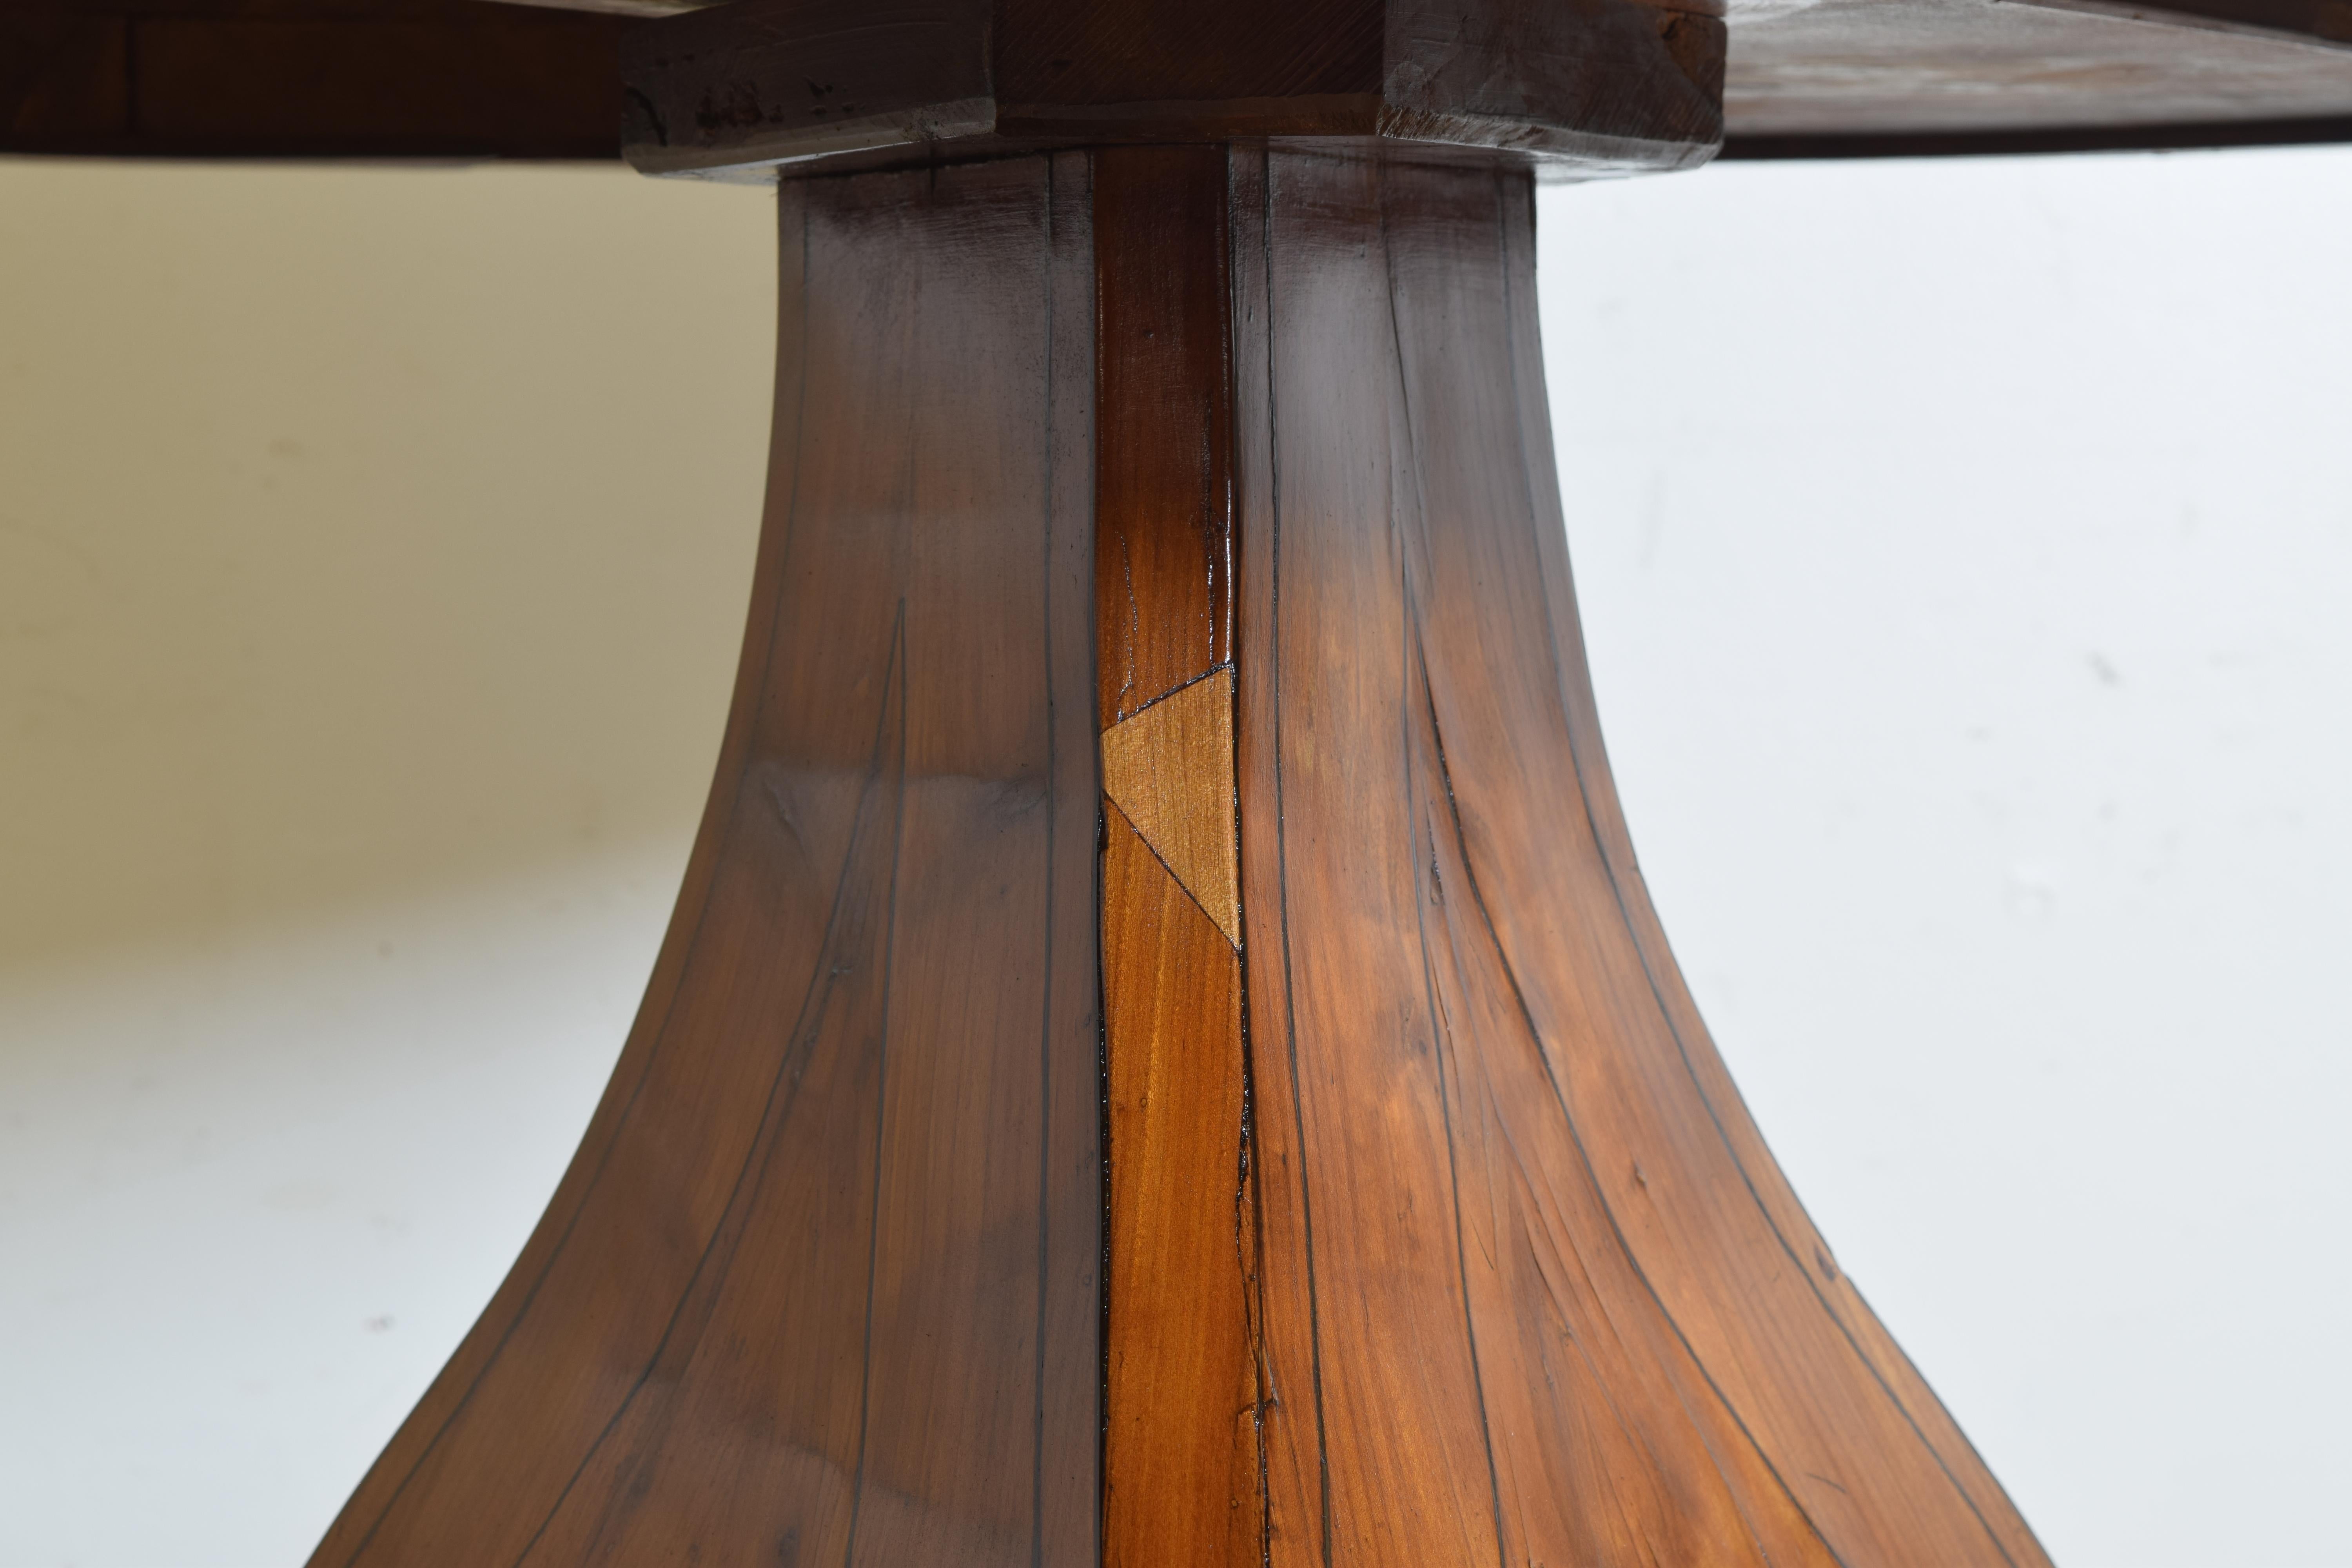 Italian Cherrywood Veneered and Inlaid Marble-Top Center Table, Mid-19th Century 10